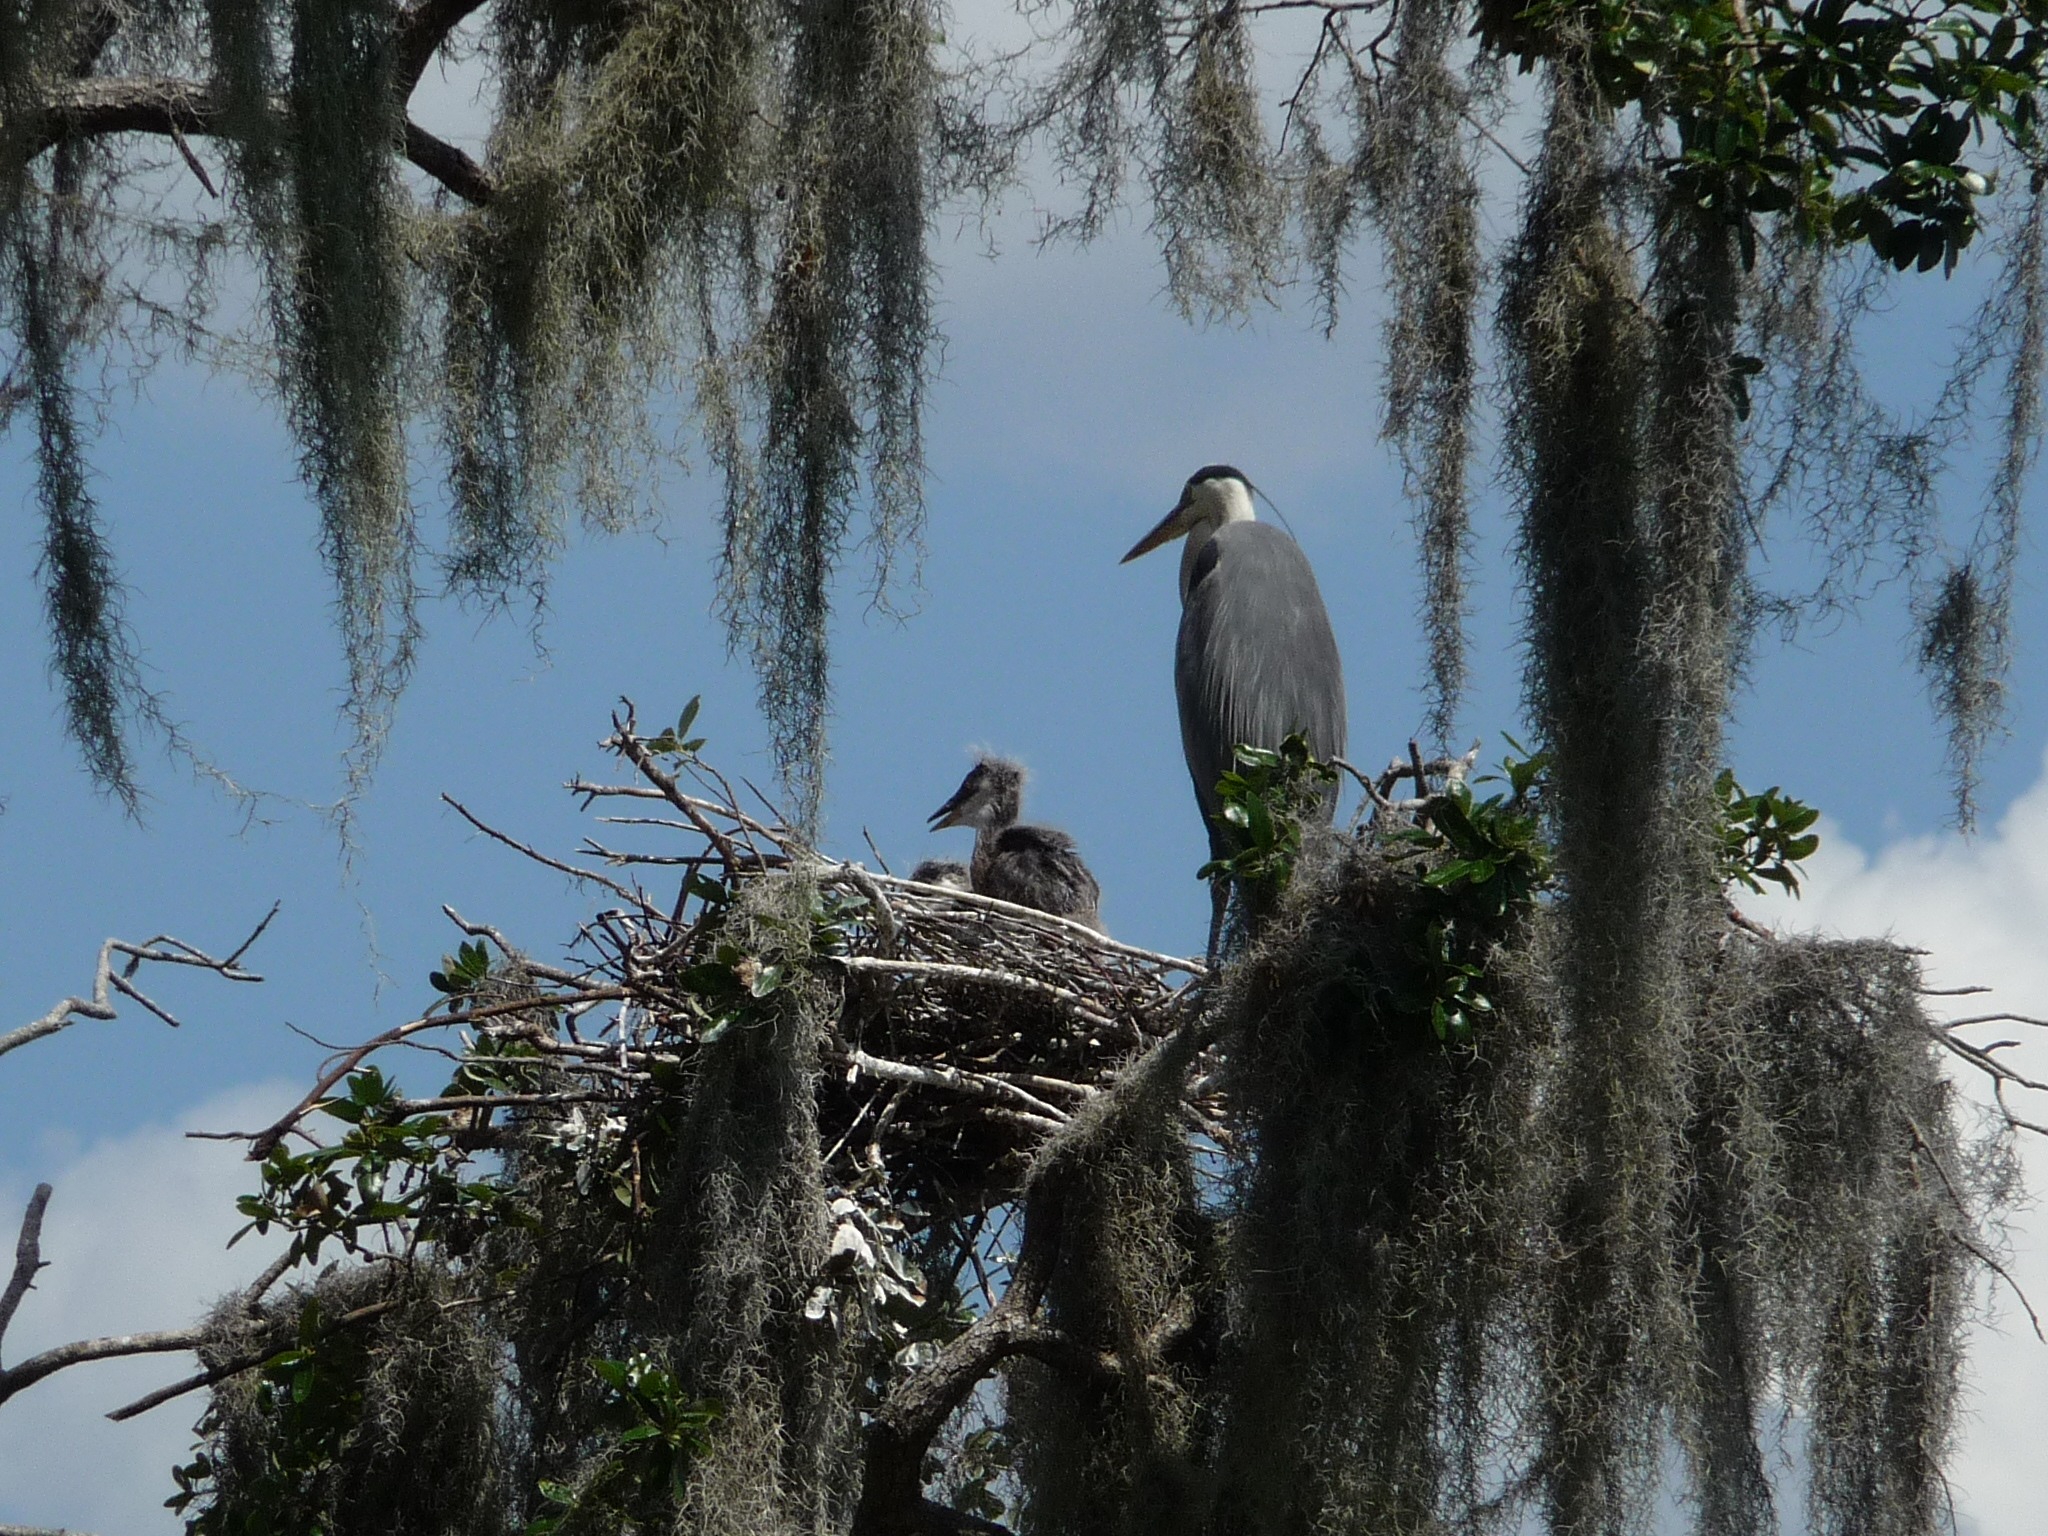 This heron was standing watch over its younglings in The Villages. 